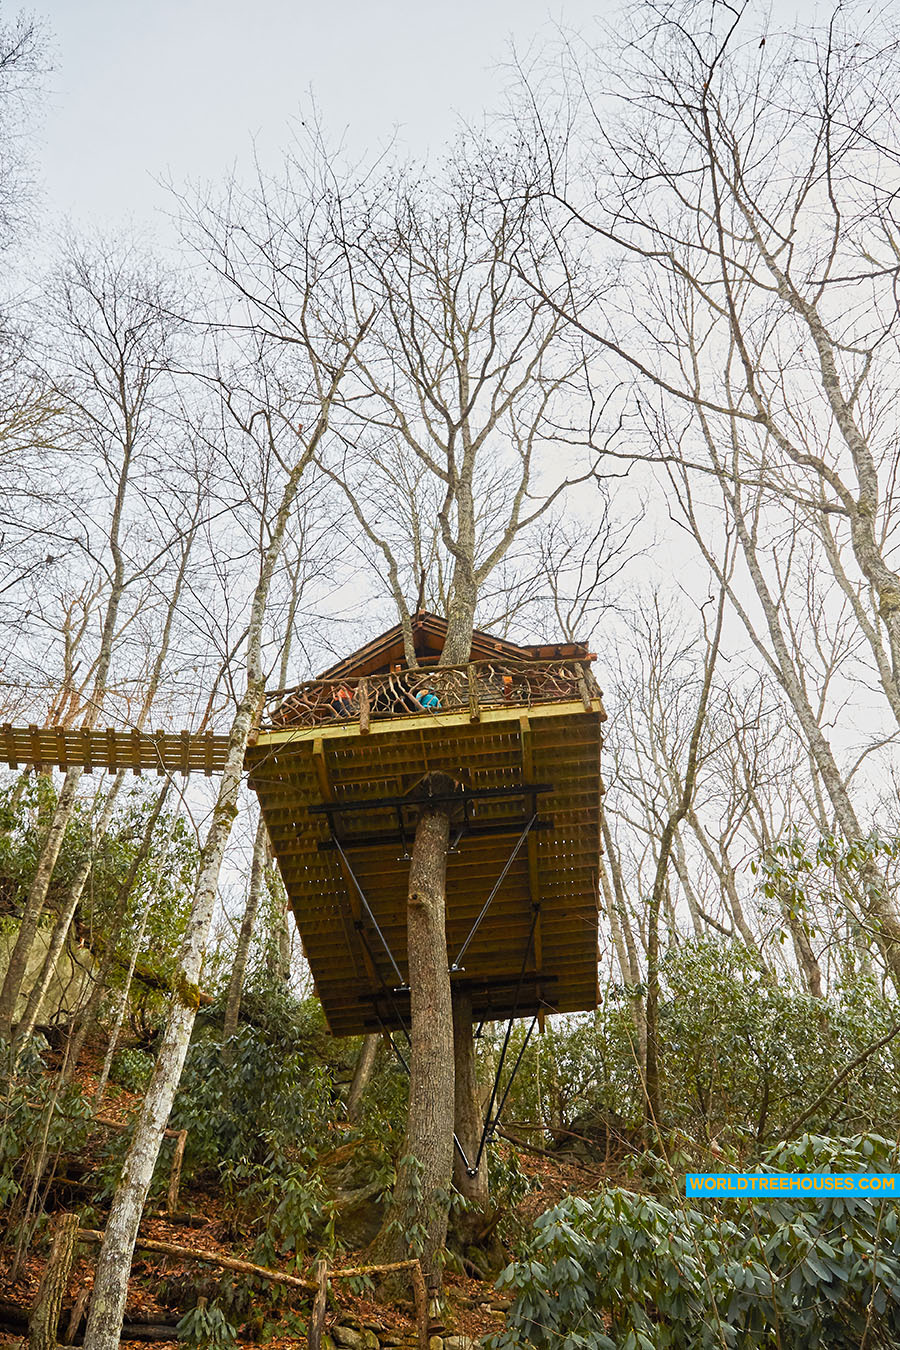 WNC tree house builders: Life in the Trees Has Never Been Better!